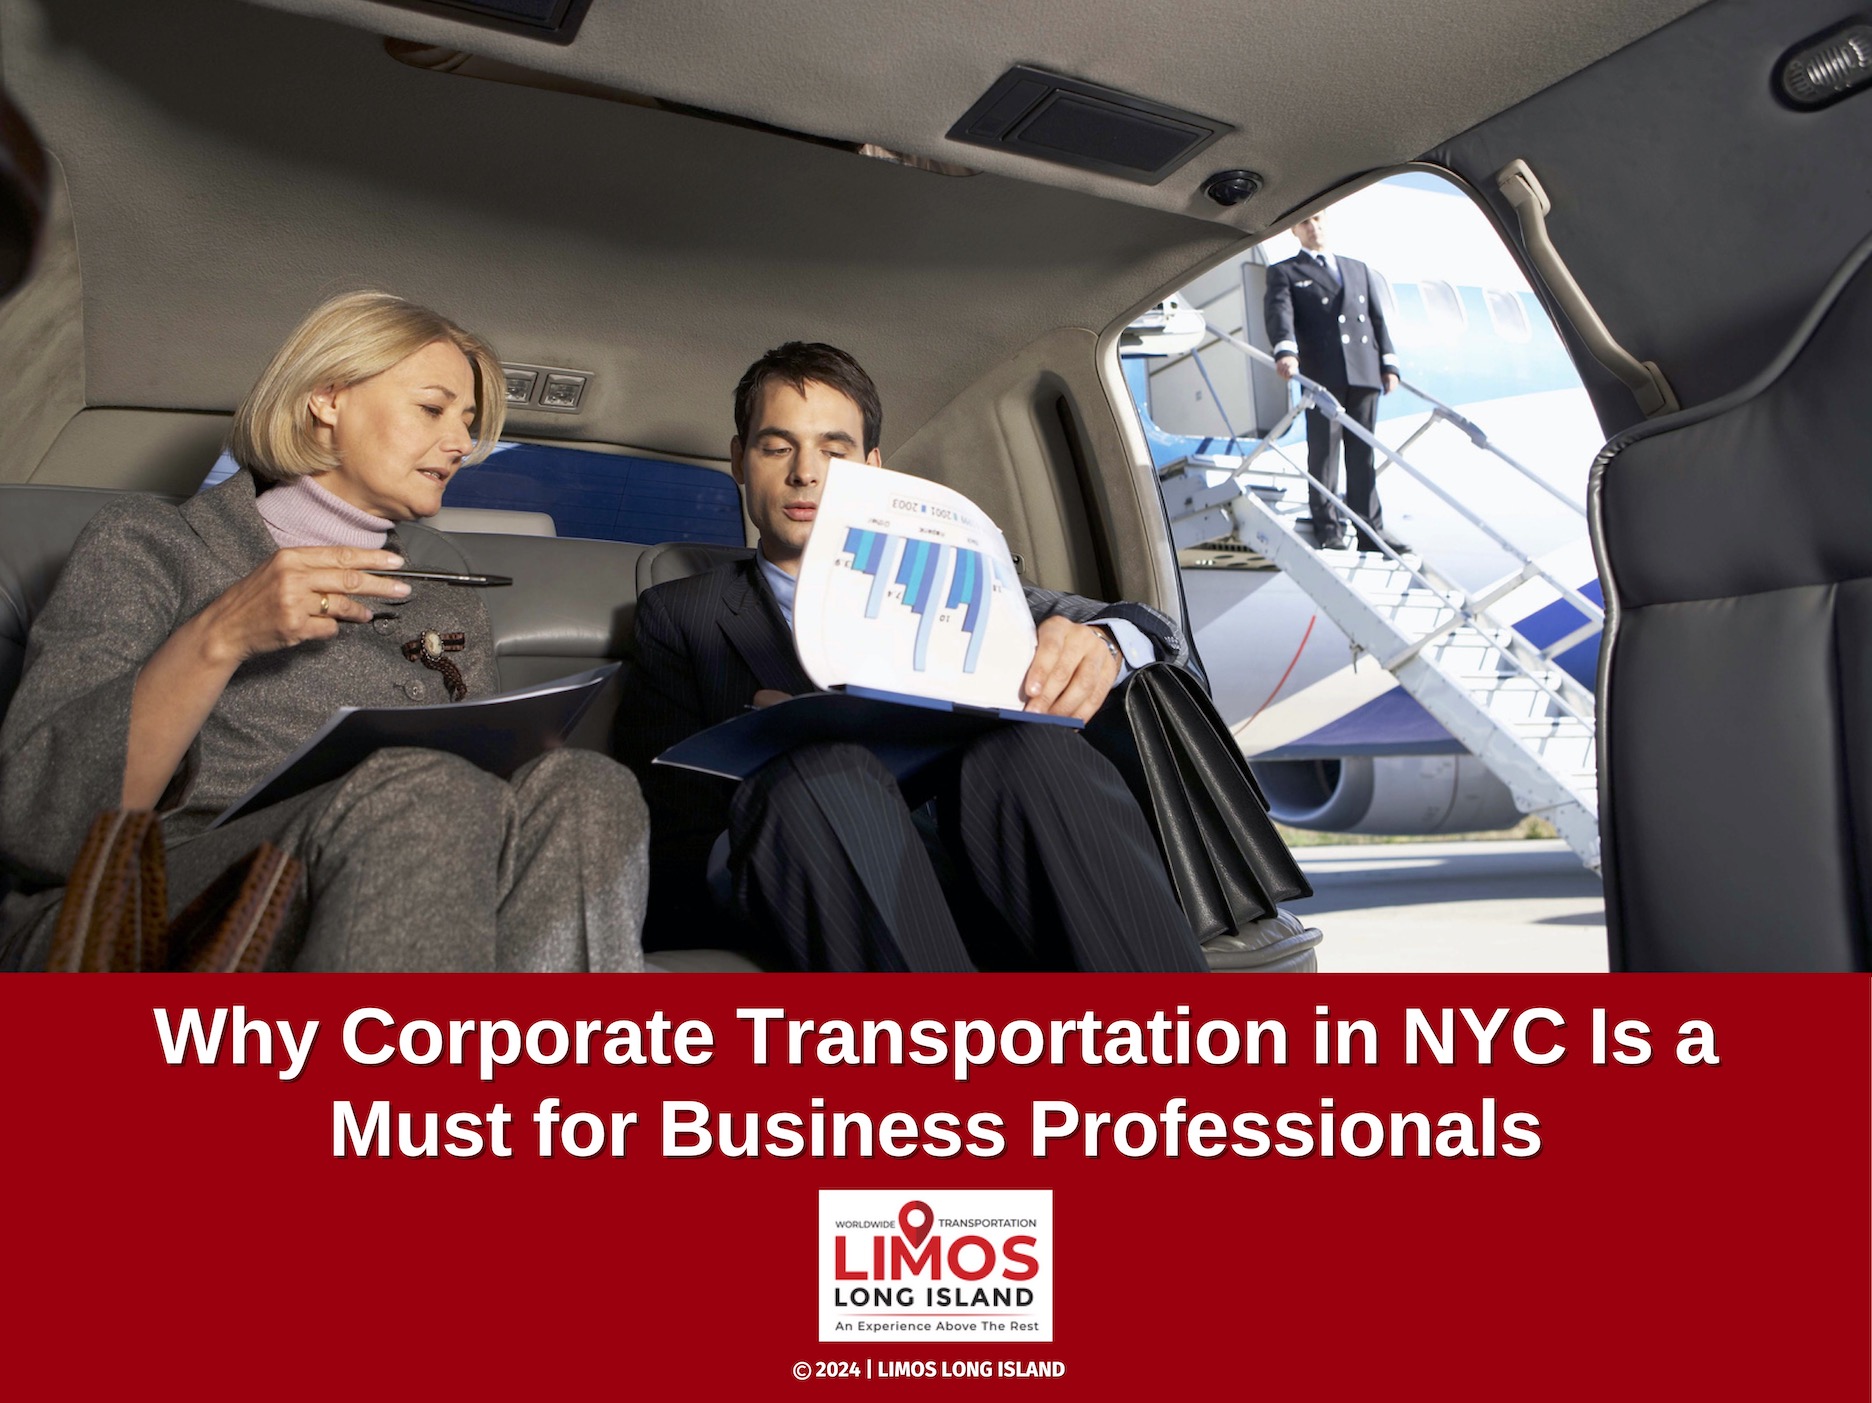 Why Corporate Transportation in NYC Is a Must for Business Professionals